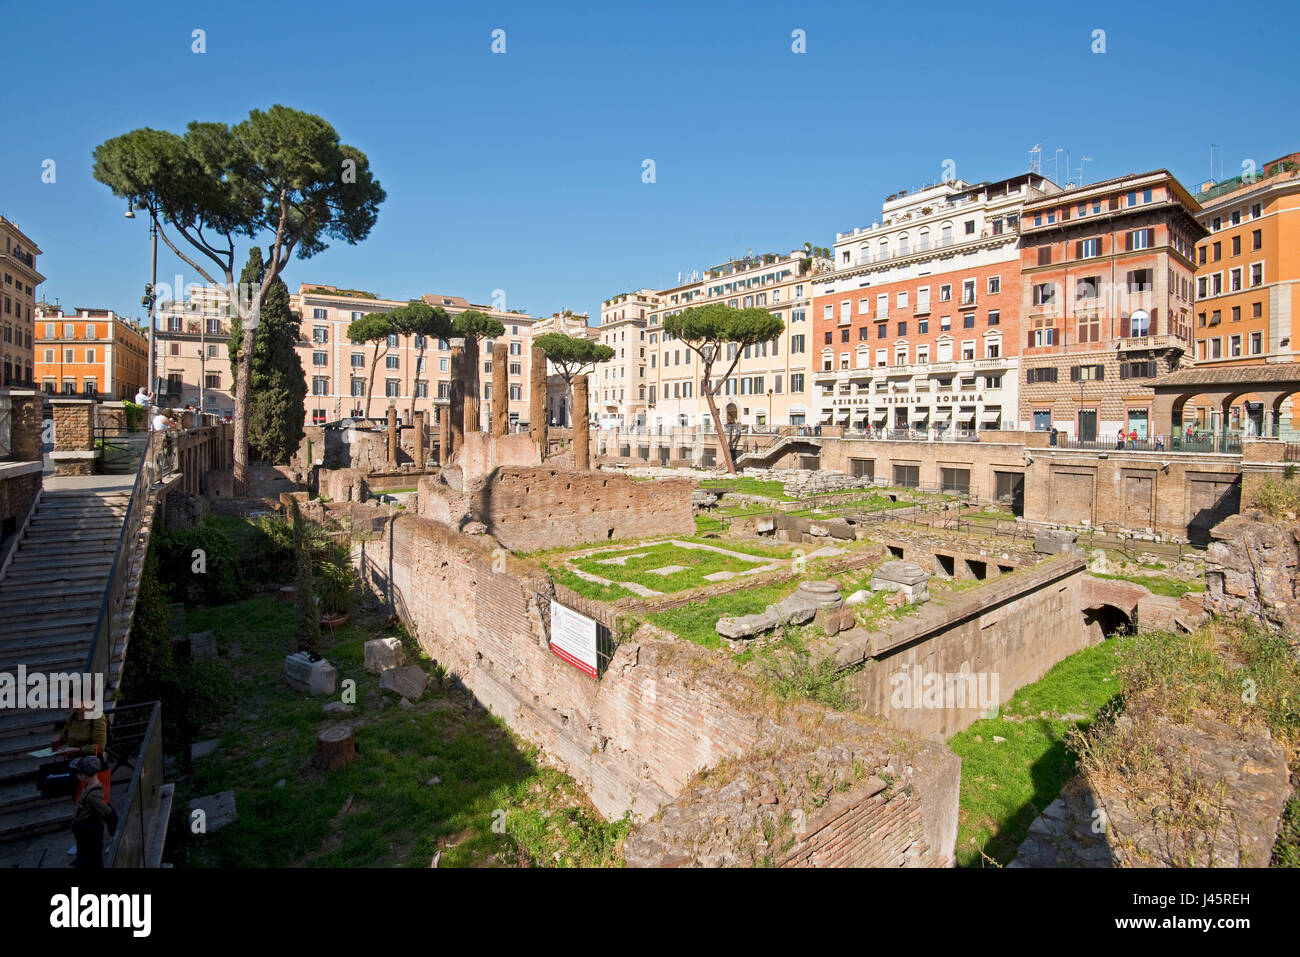 Largo di Torre Argentina in Rome on a sunny day with blue sky. Stock Photo